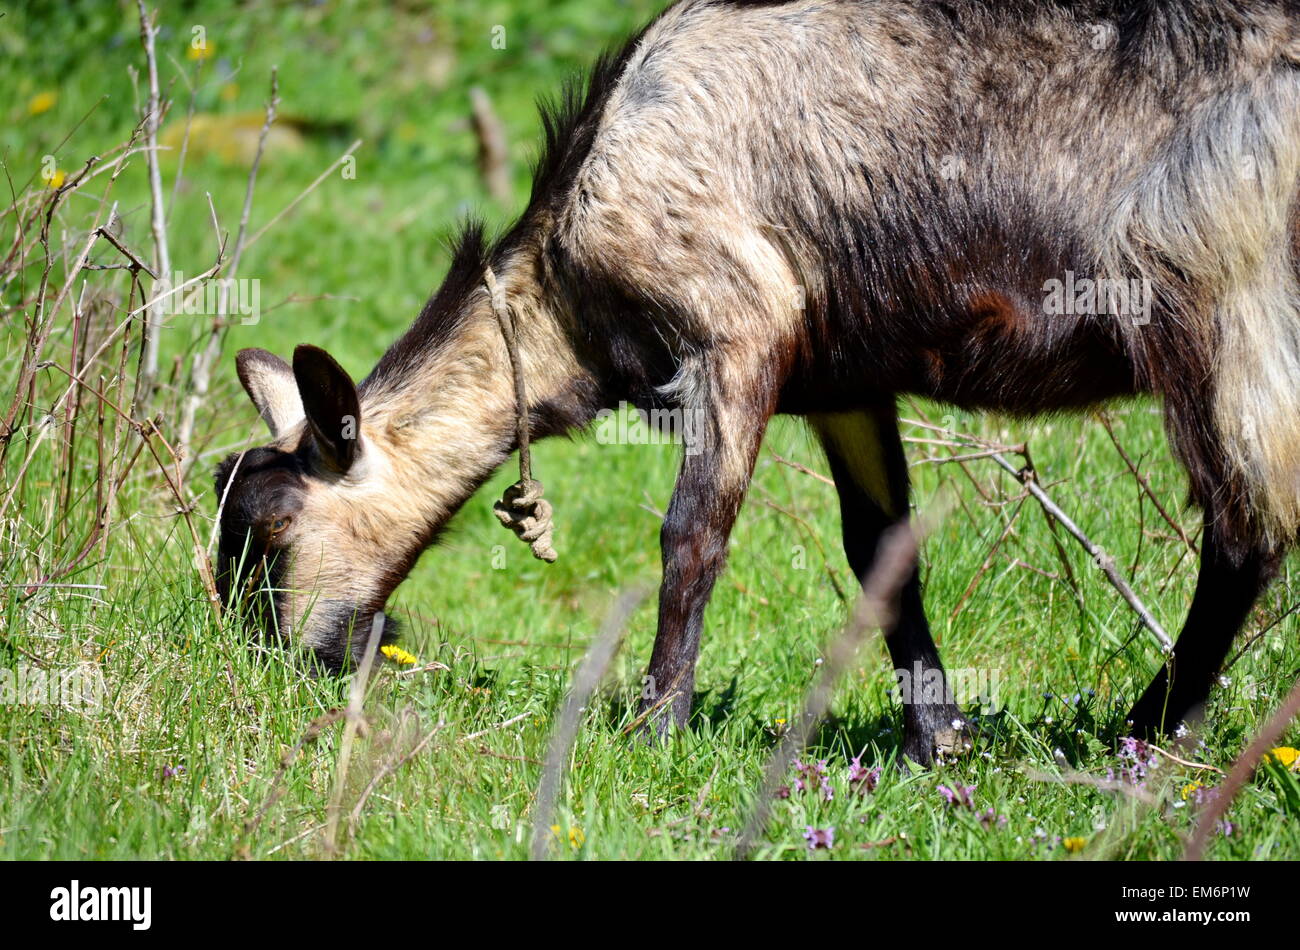 Black goat grazing in the grass Stock Photo